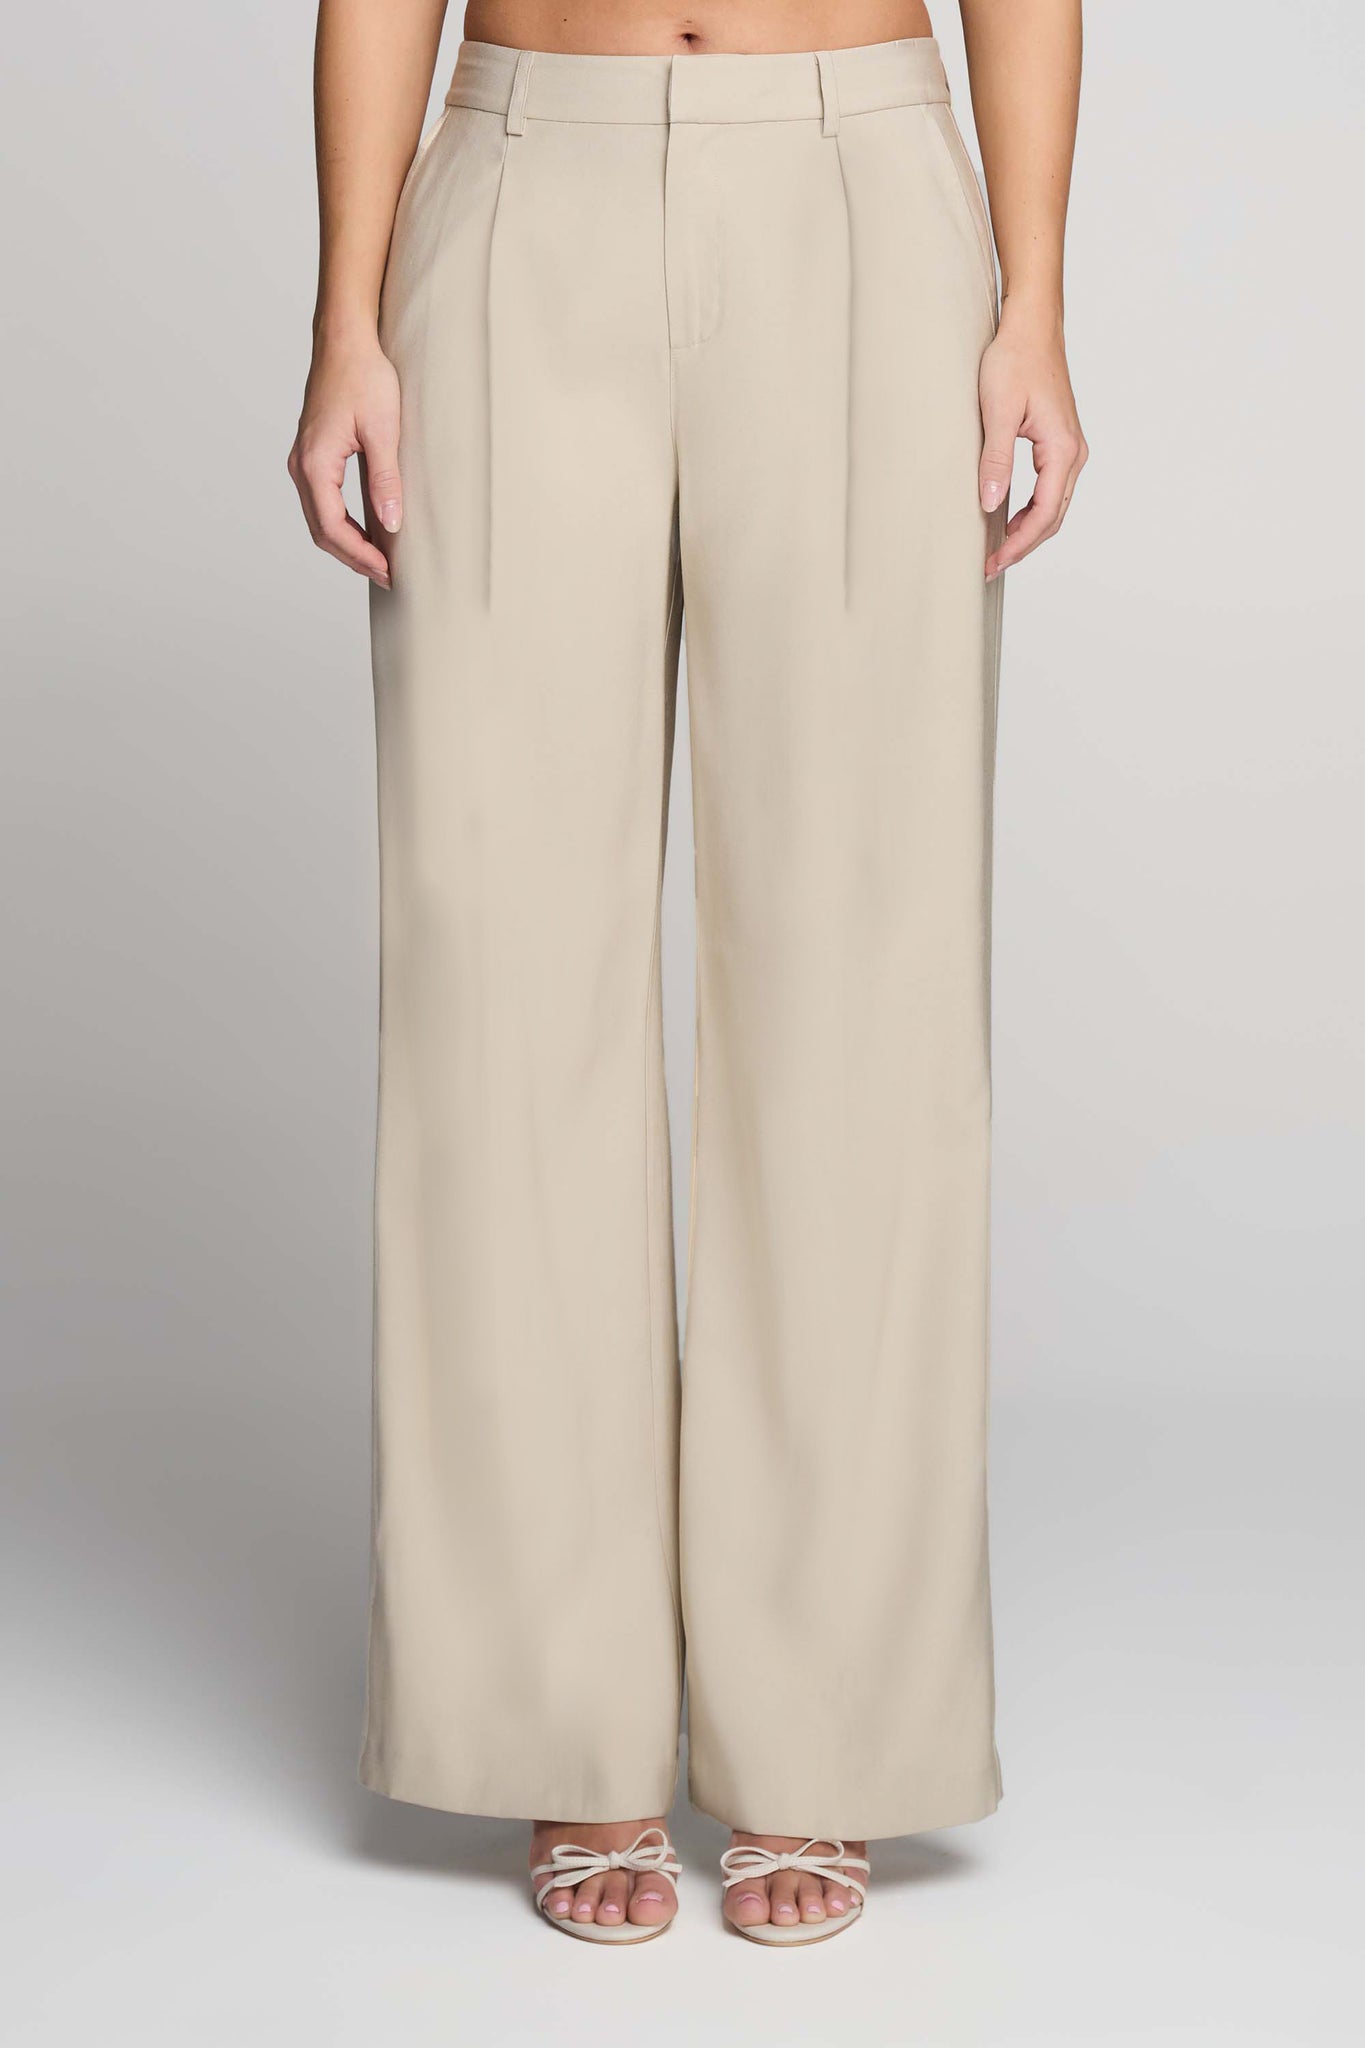 Casual Pure Color Loose Pants #Pure, #SPONSORED, #Casual, #Color, #Pants  #Adver